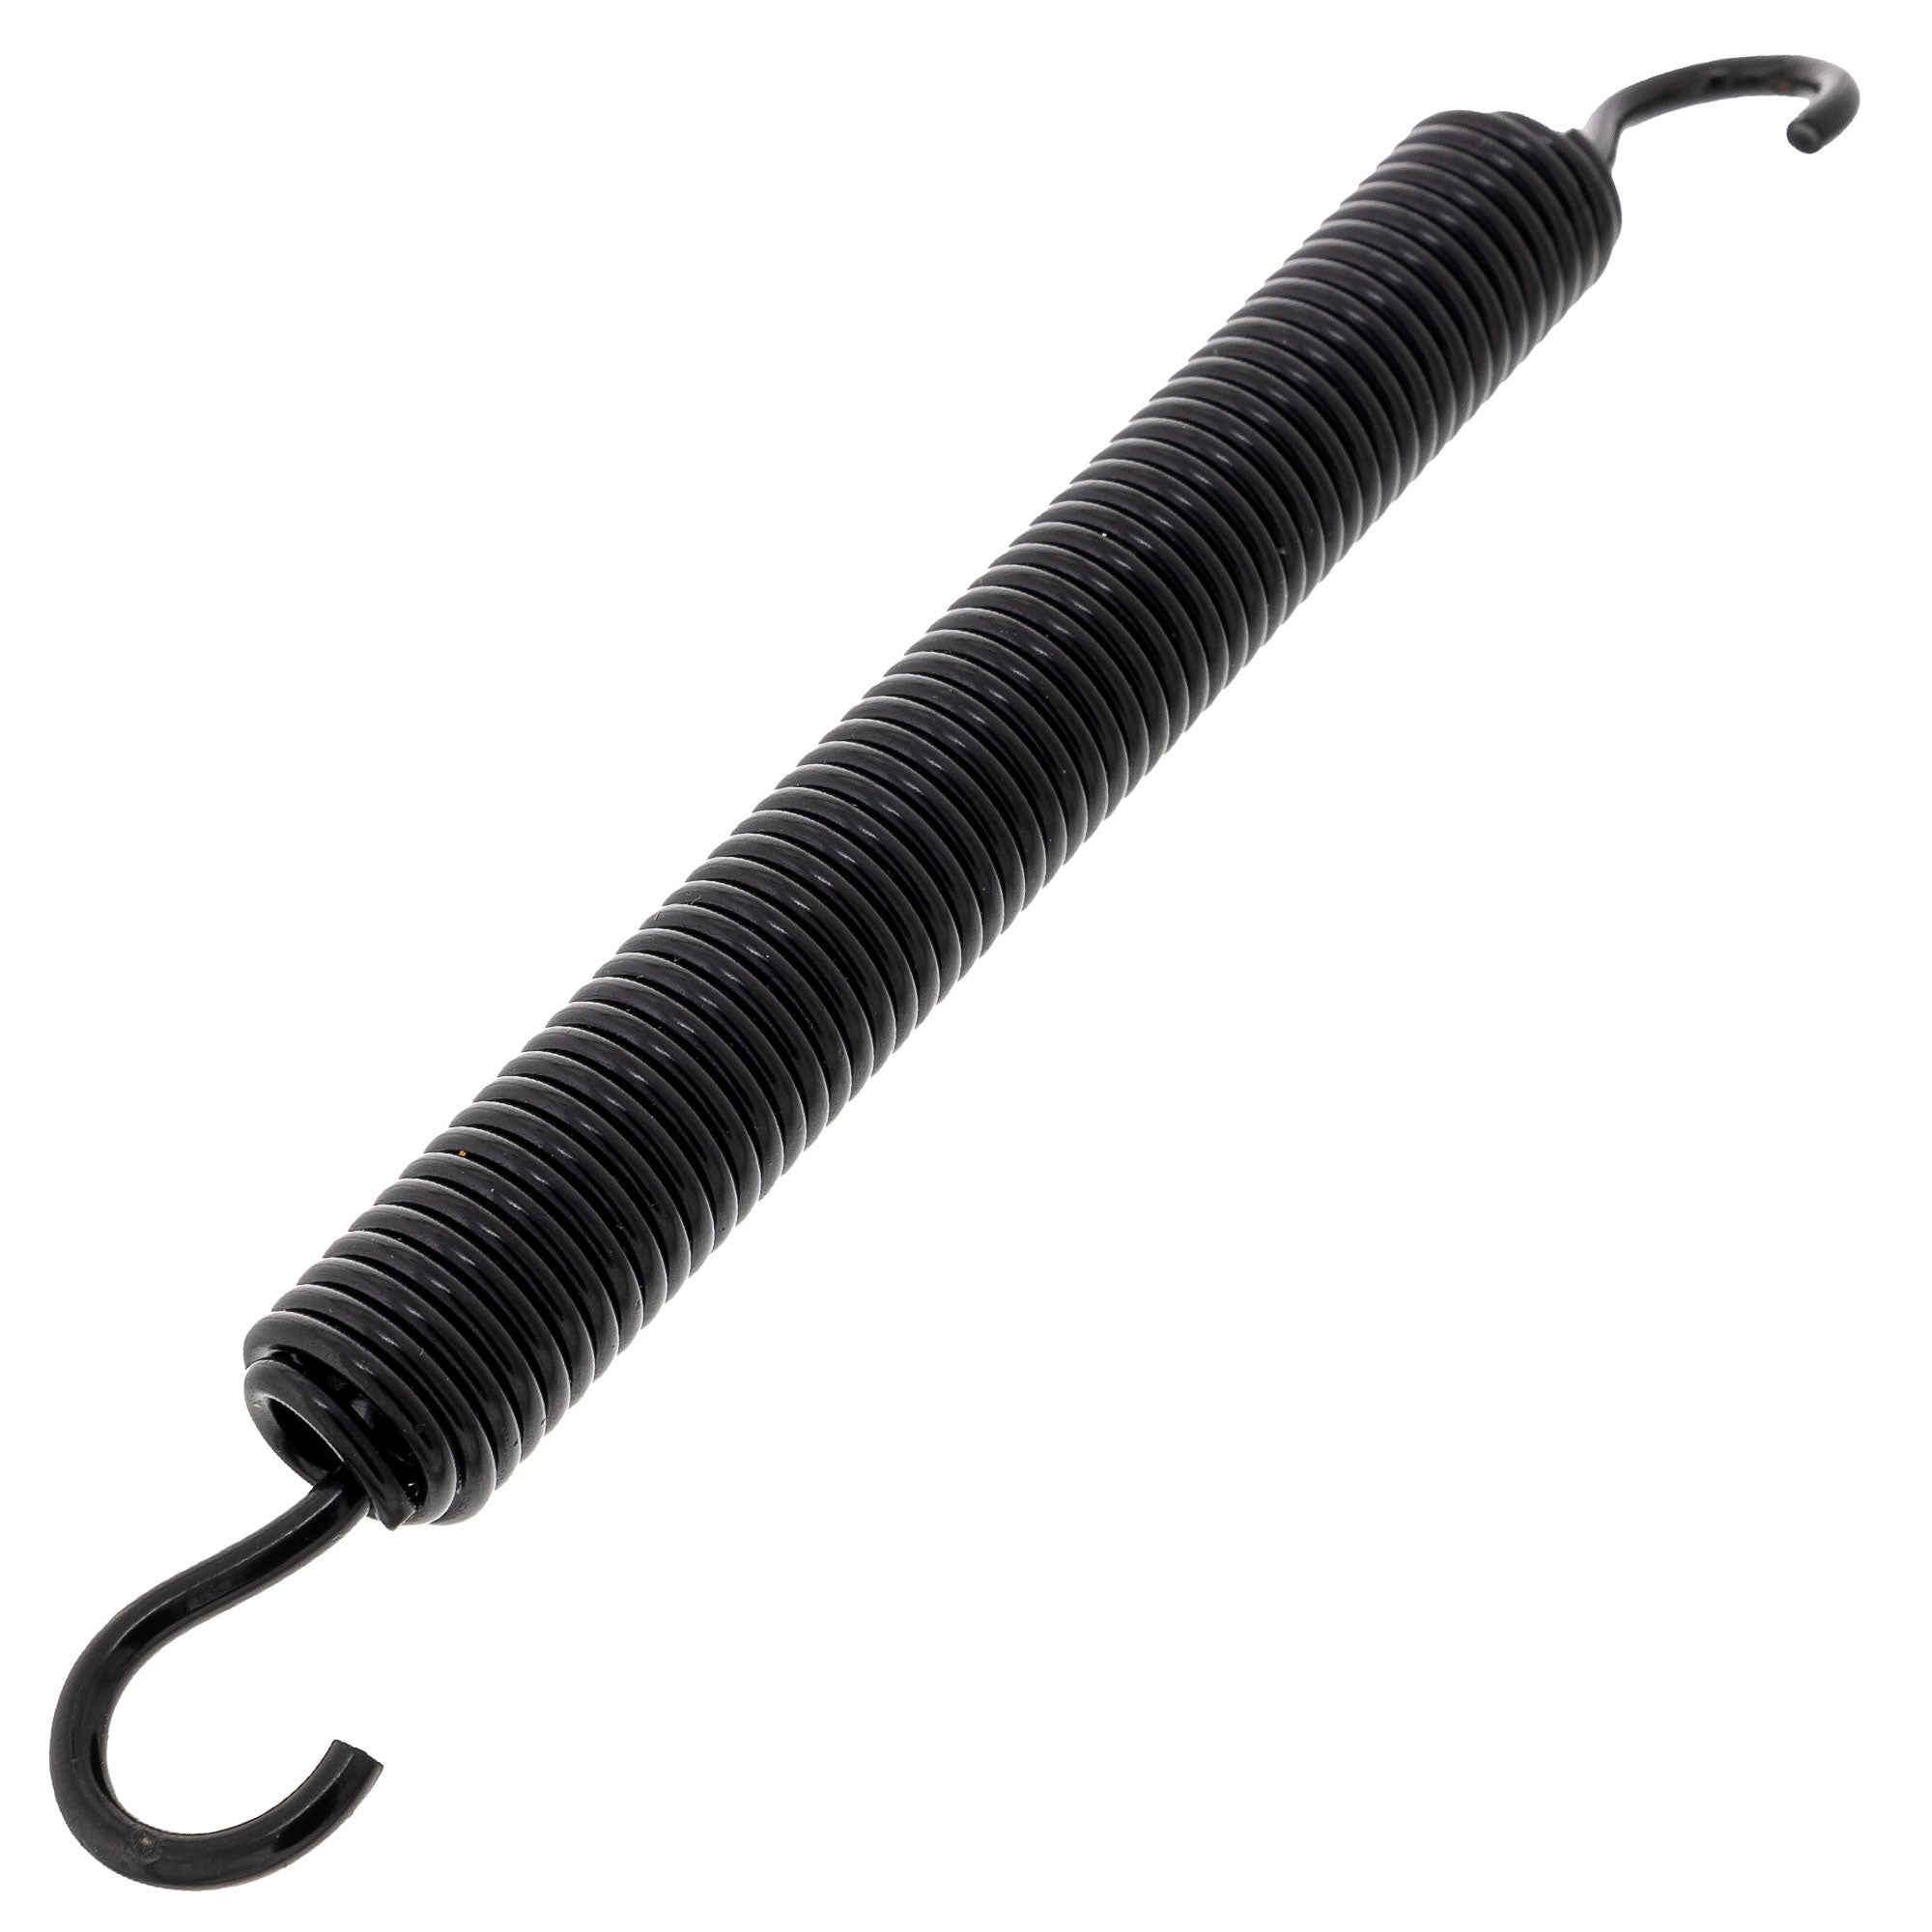 Ariens 08300512 Extension Spring Gravely 915143 915159 915161 915169 915171